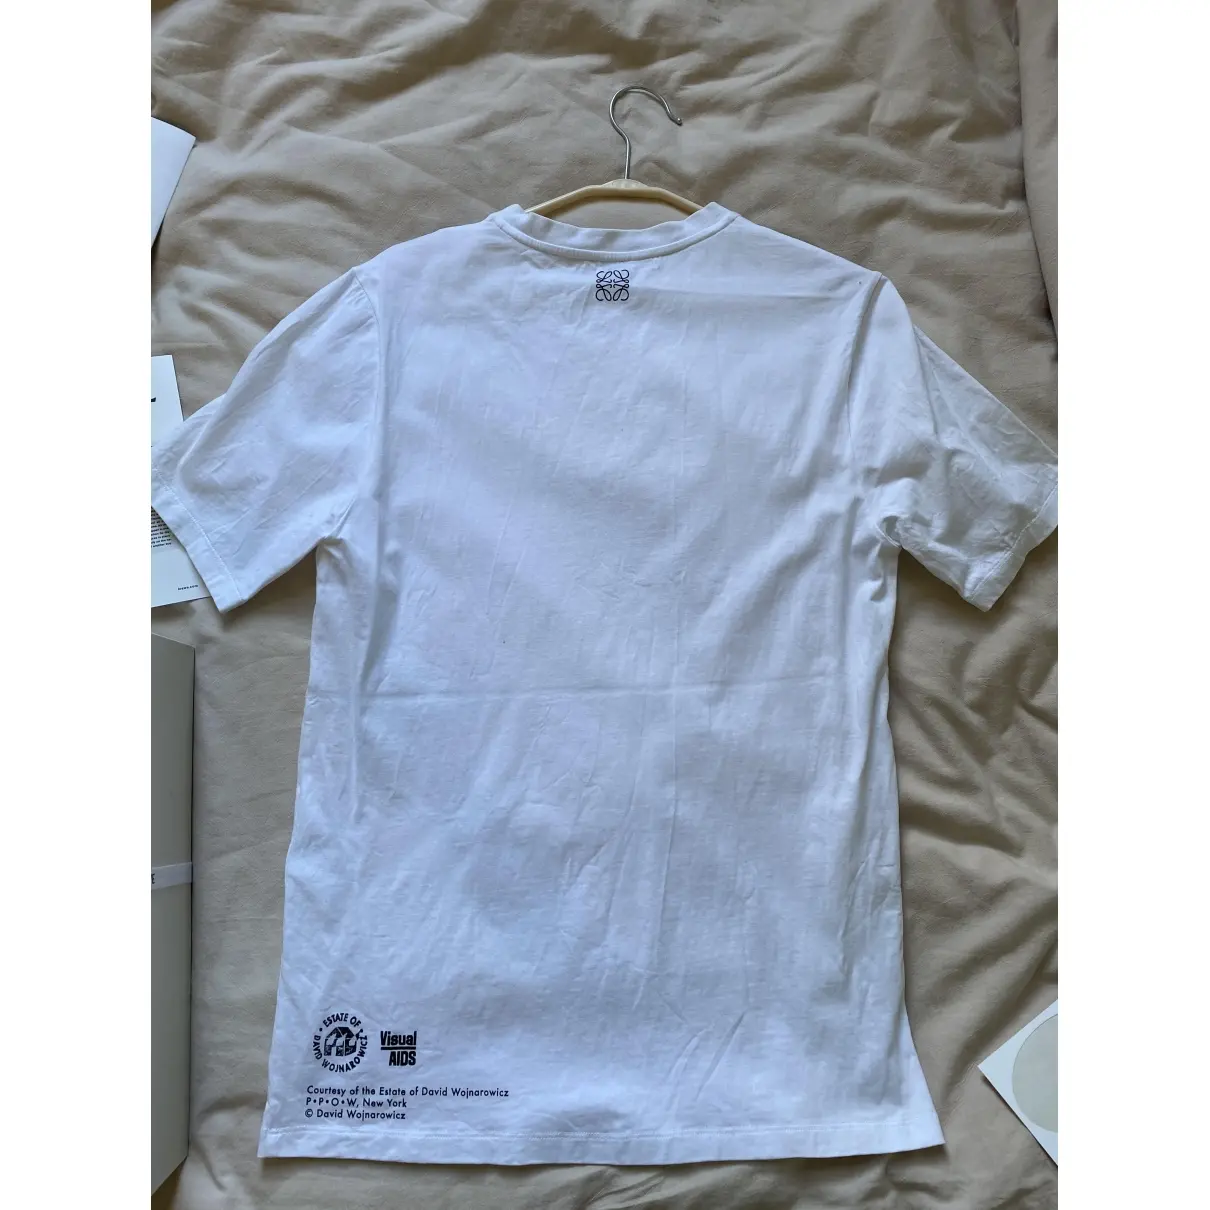 Loewe White Cotton T-shirt for sale